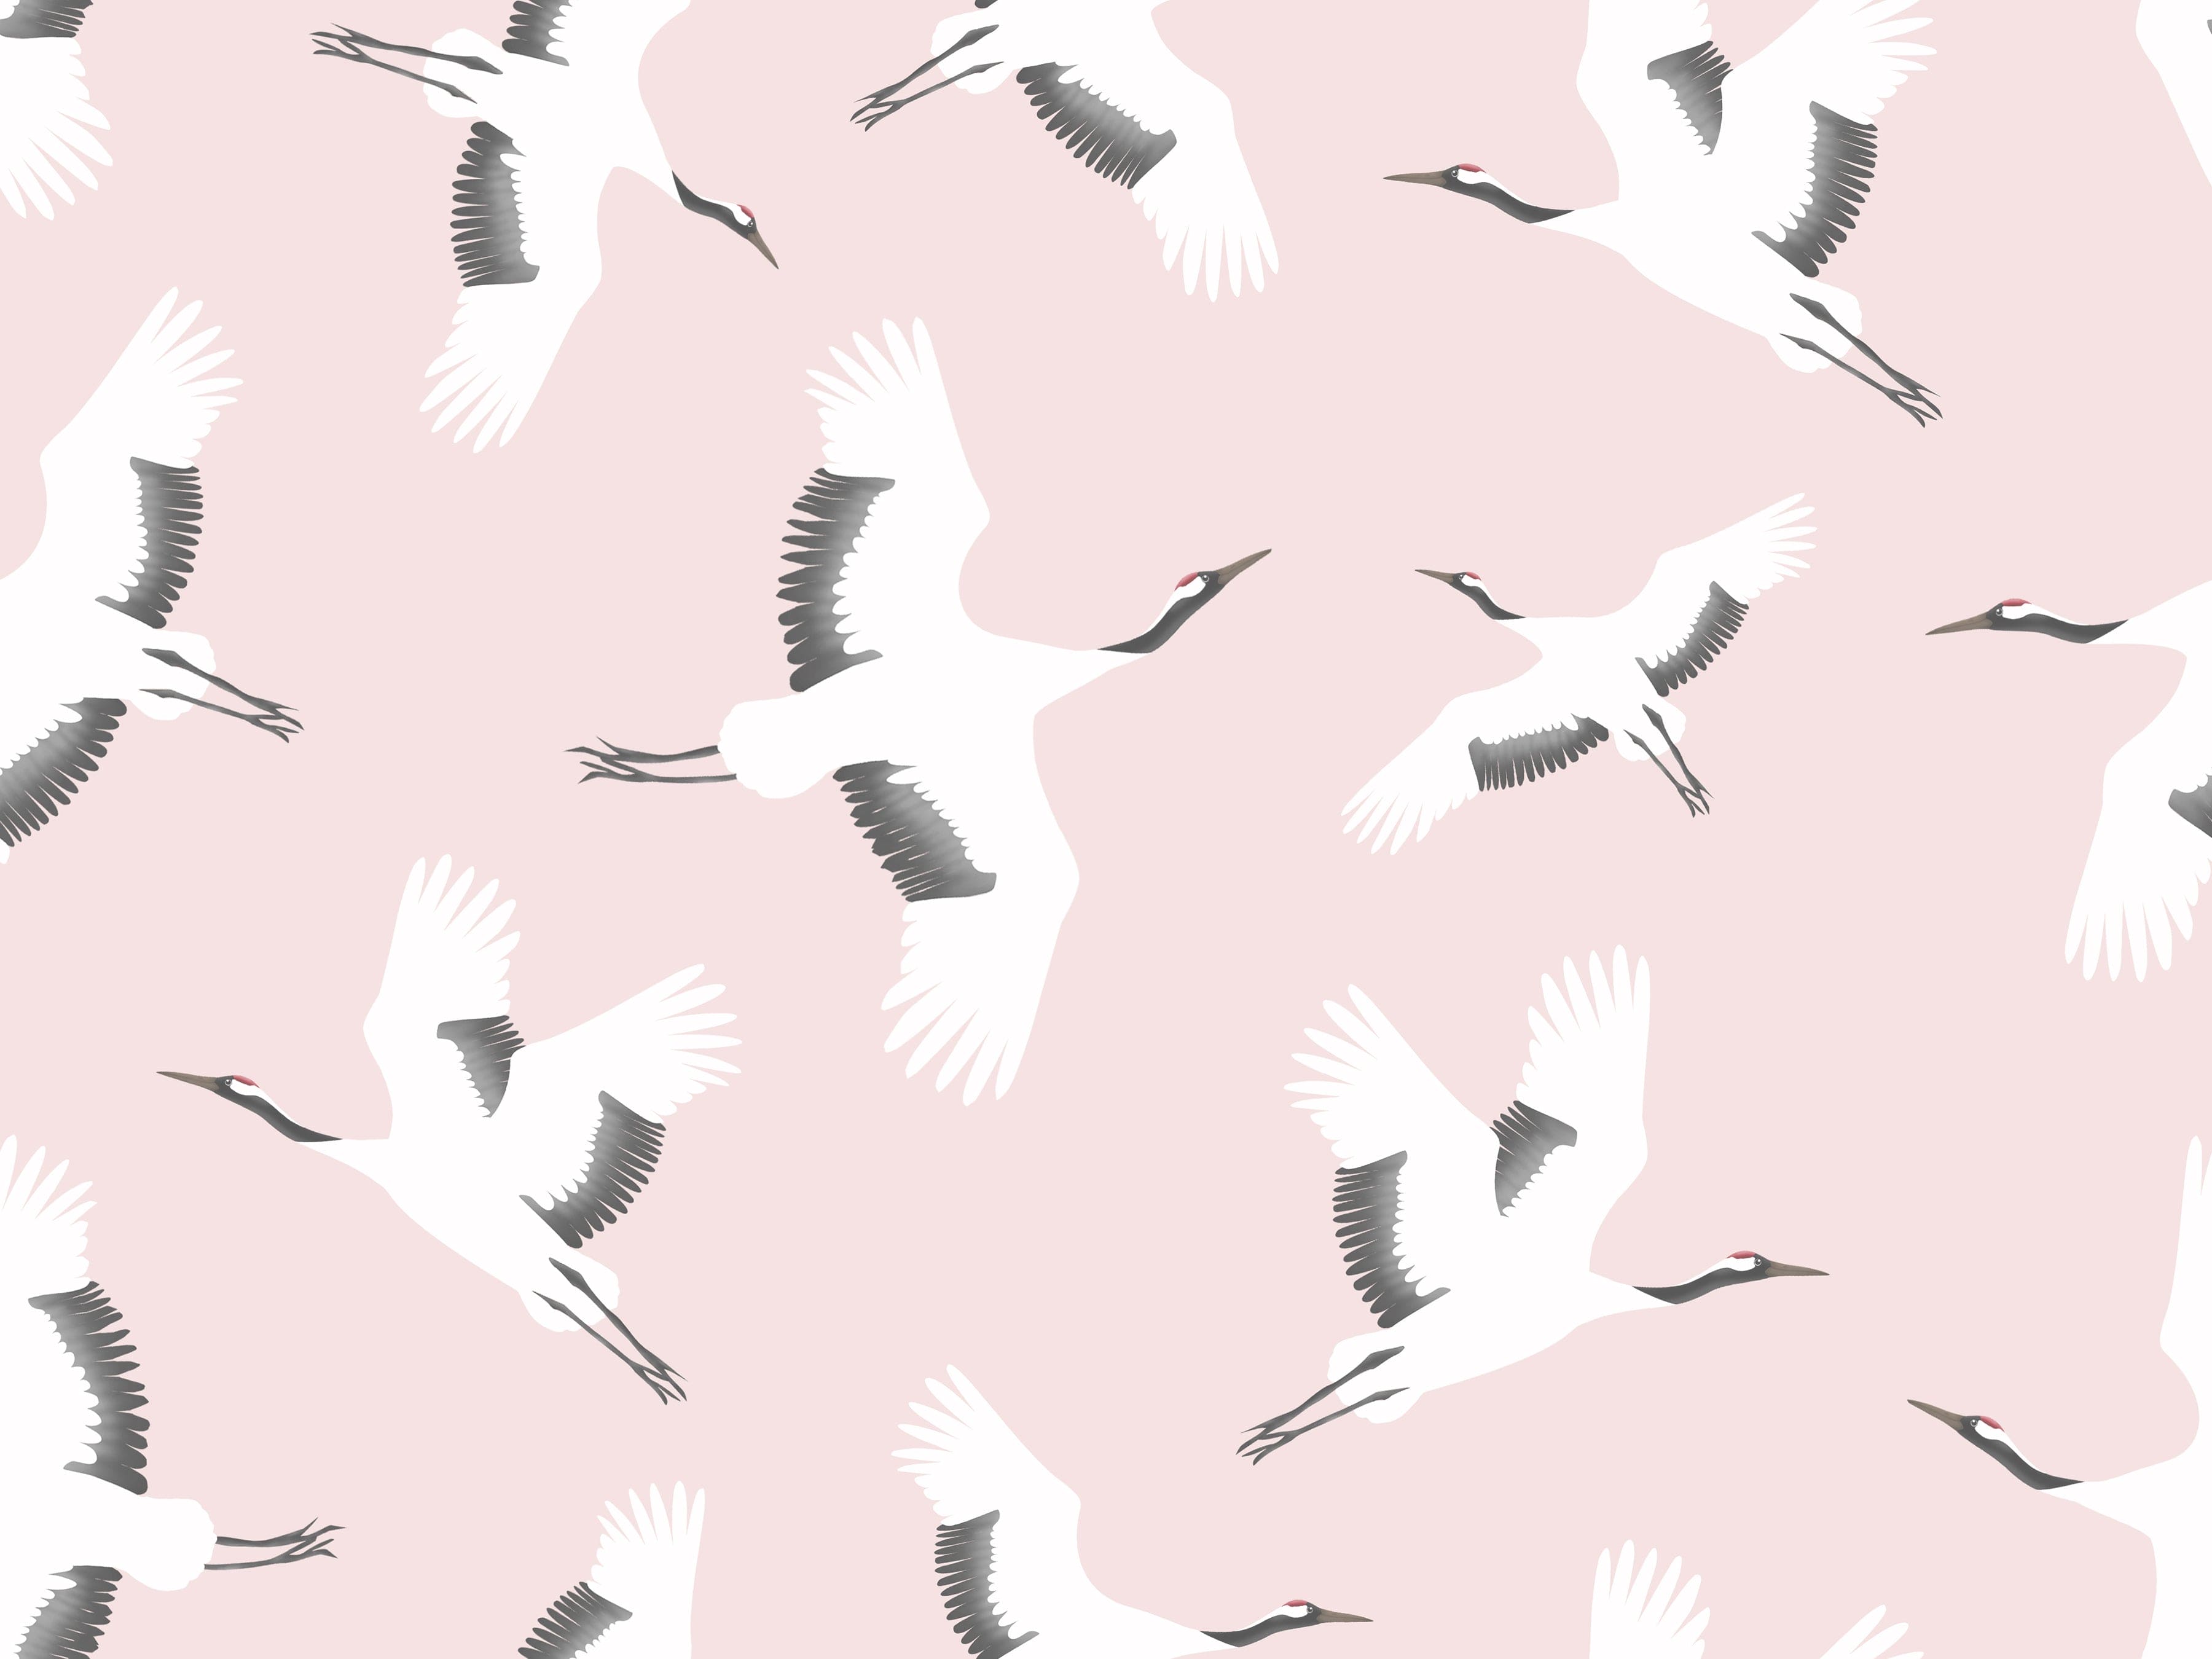 Close-up view of the 'Kids Crane Wallpaper' showing graceful white cranes soaring across a pale pink backdrop, evoking a sense of freedom and tranquility